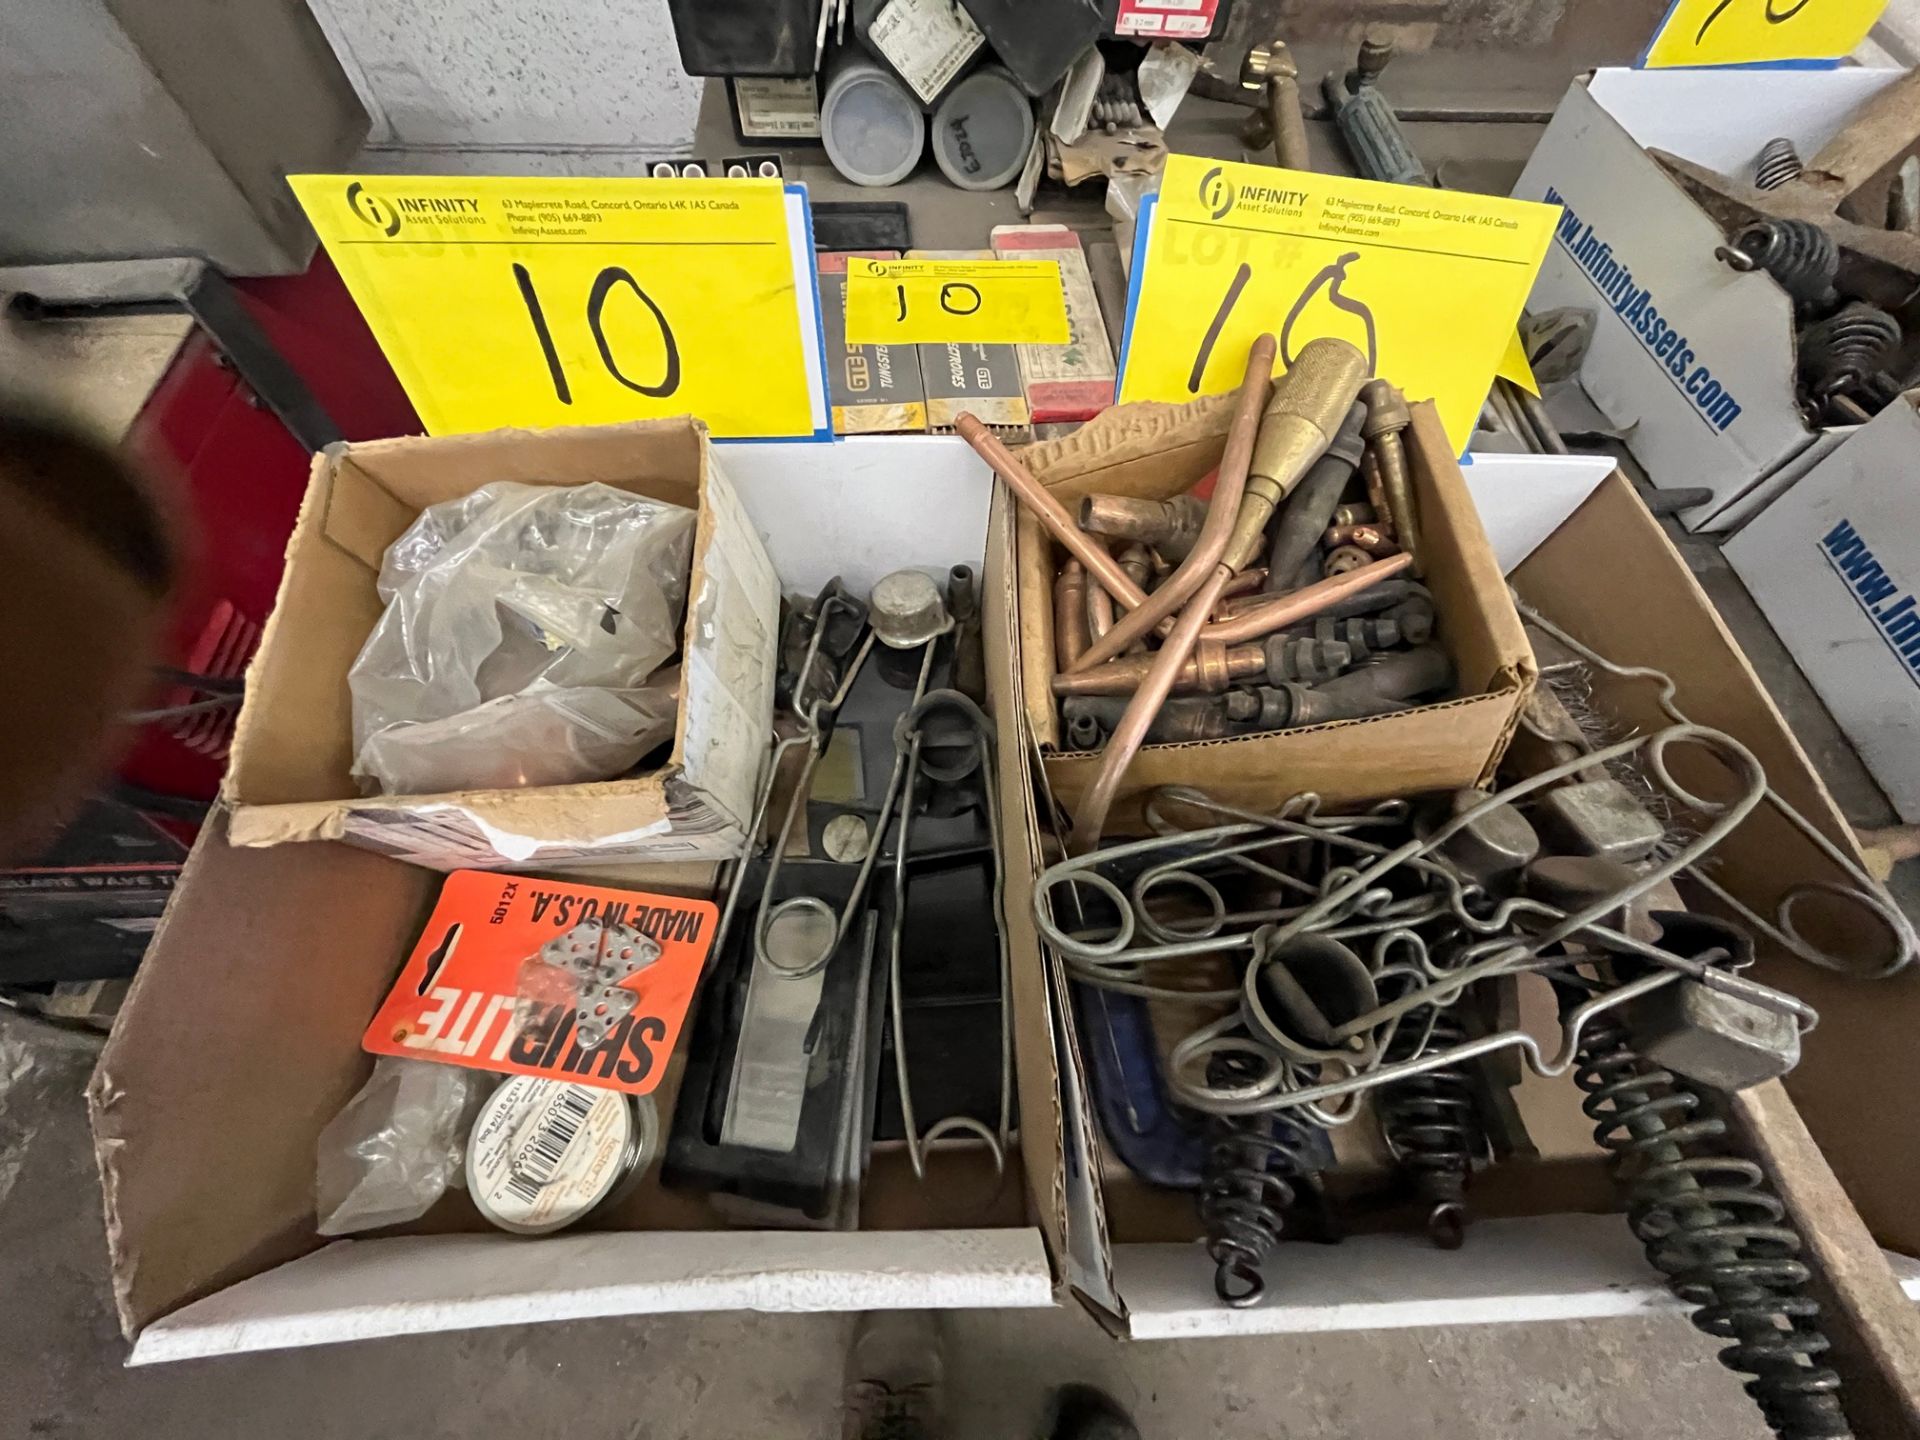 LOT OF WELDING TORCHES, ELECTRODES, WIRE REELS, TOOLS, TIPS, REGULATORS, ETC. - Image 3 of 7